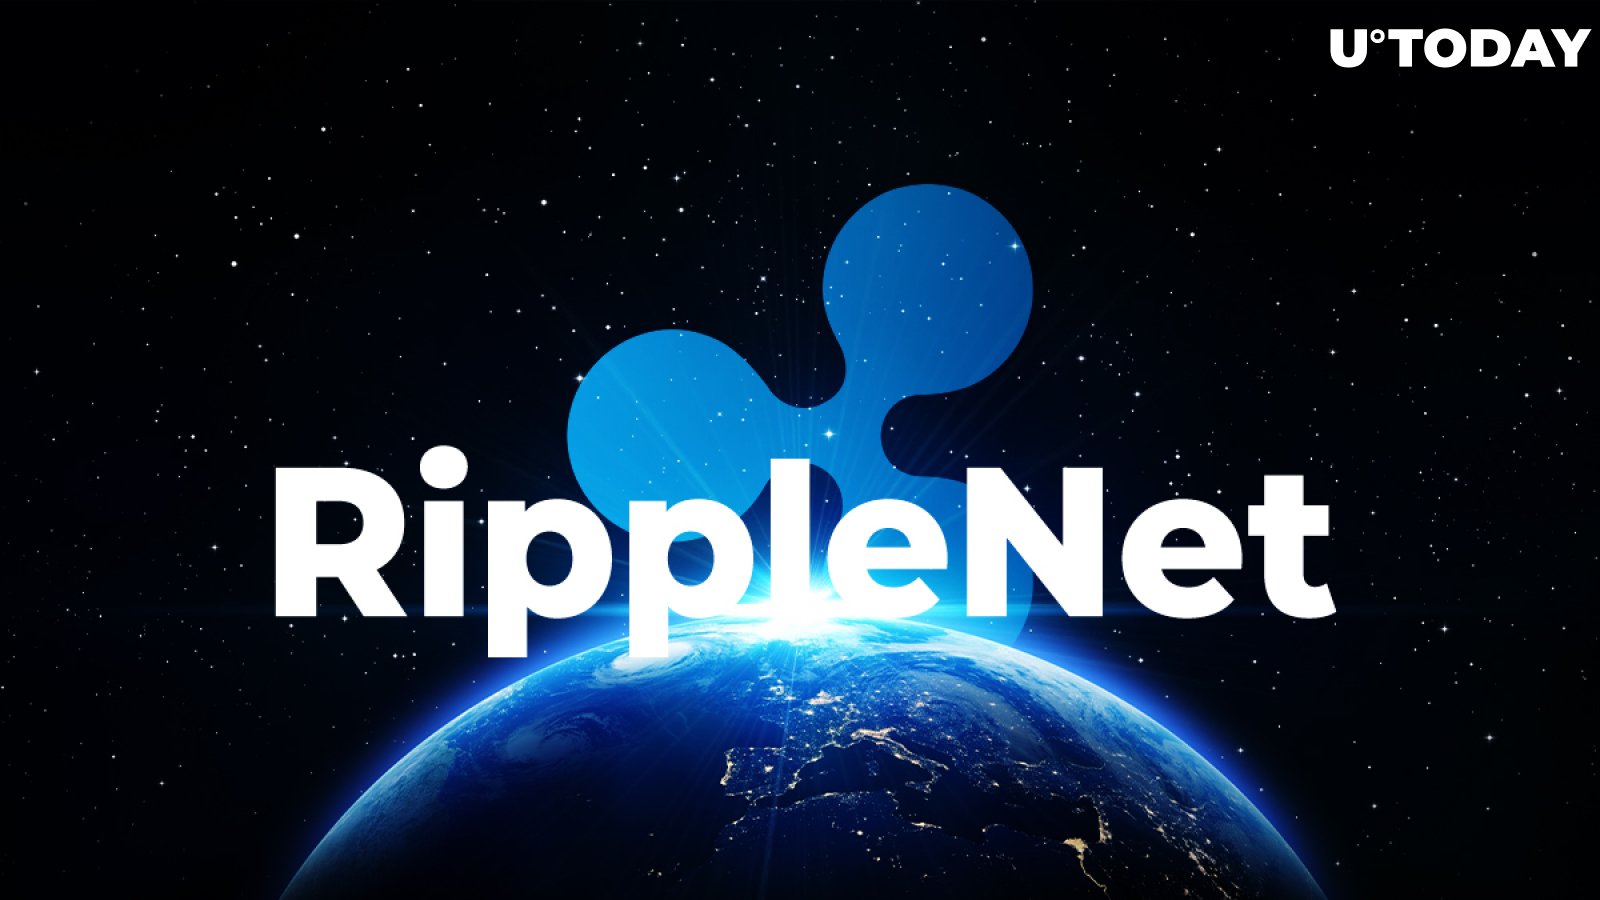 Ripple Seeks to Identify New Business Opportunities and Drive Wider RippleNet Adoption by Hiring Account Manager